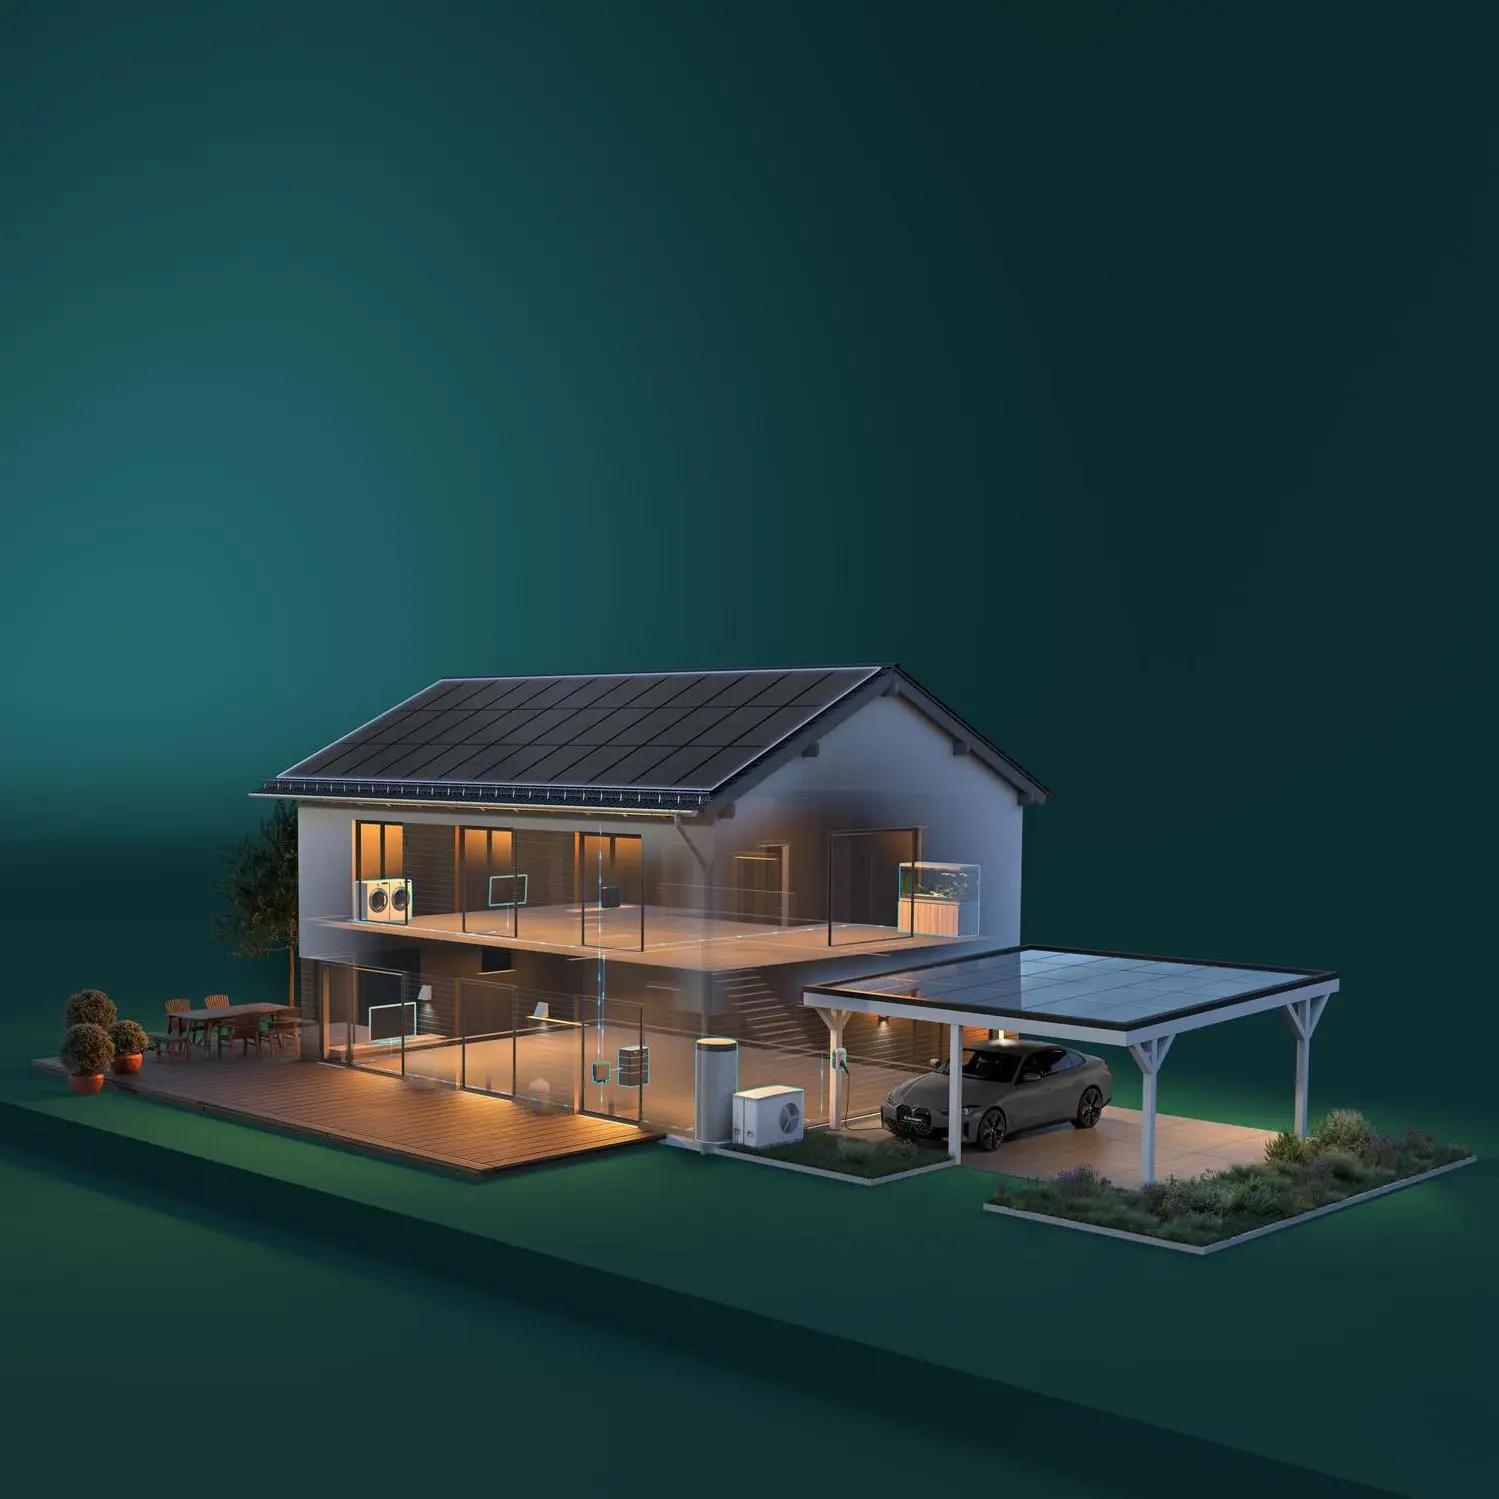 A 3D model of a house and a carport with a solar system as a roof.